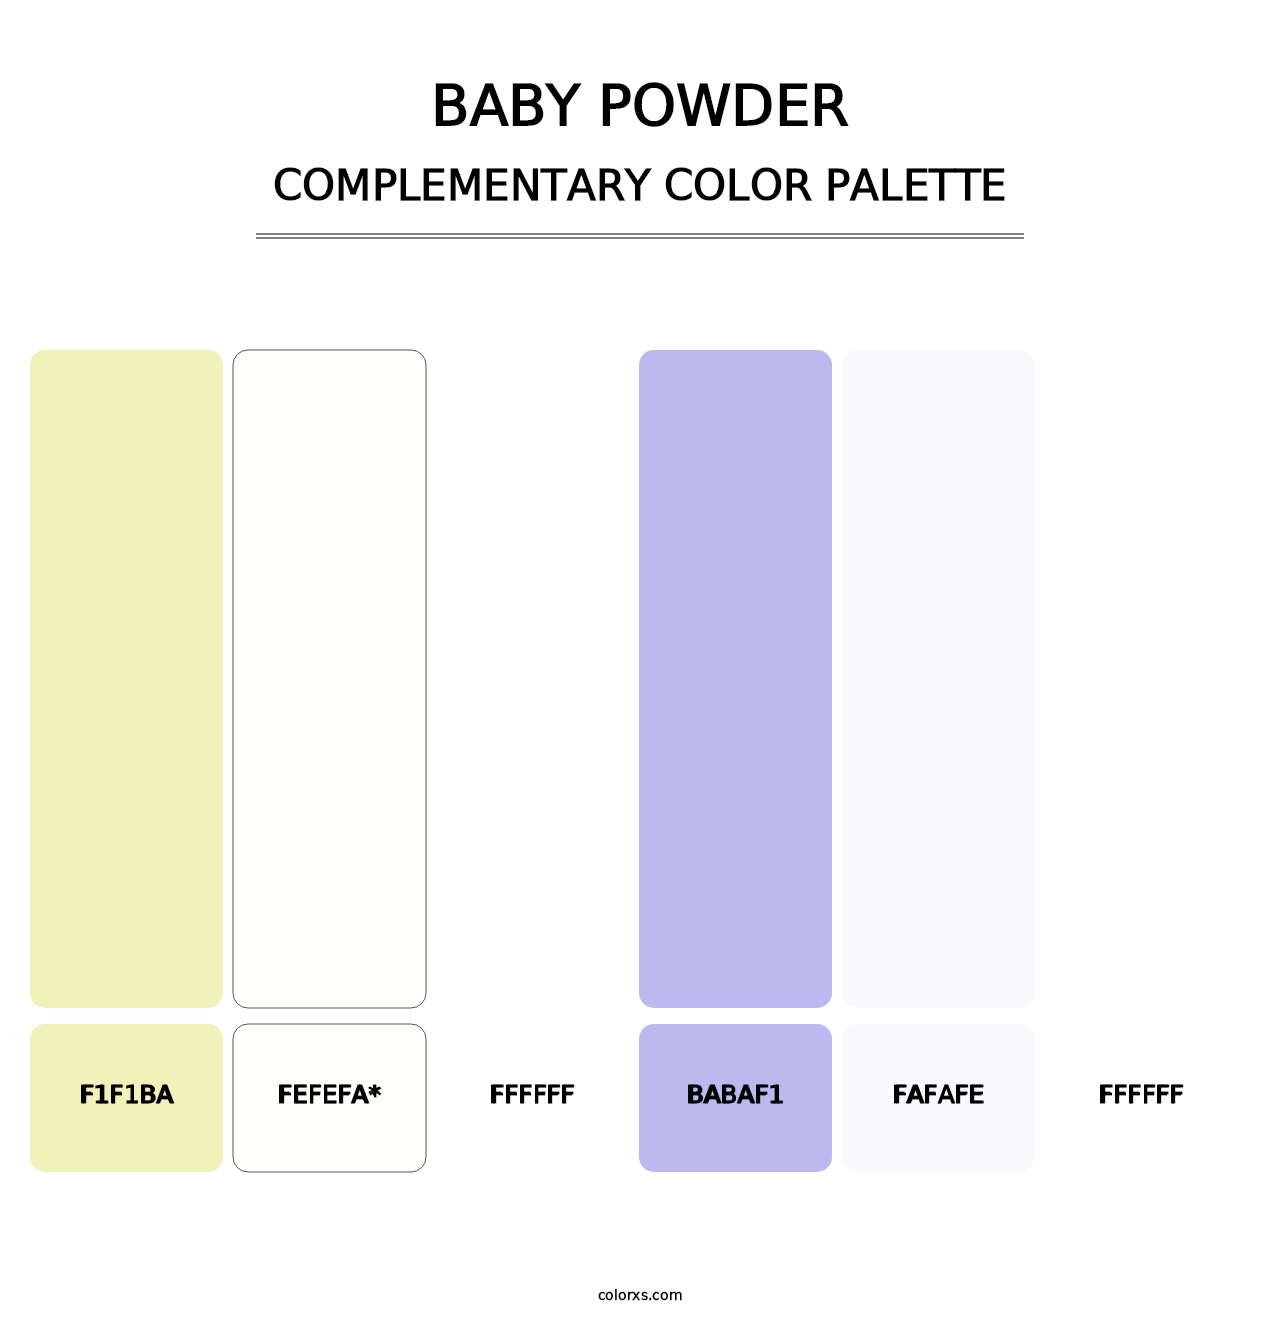 Baby Powder - Complementary Color Palette